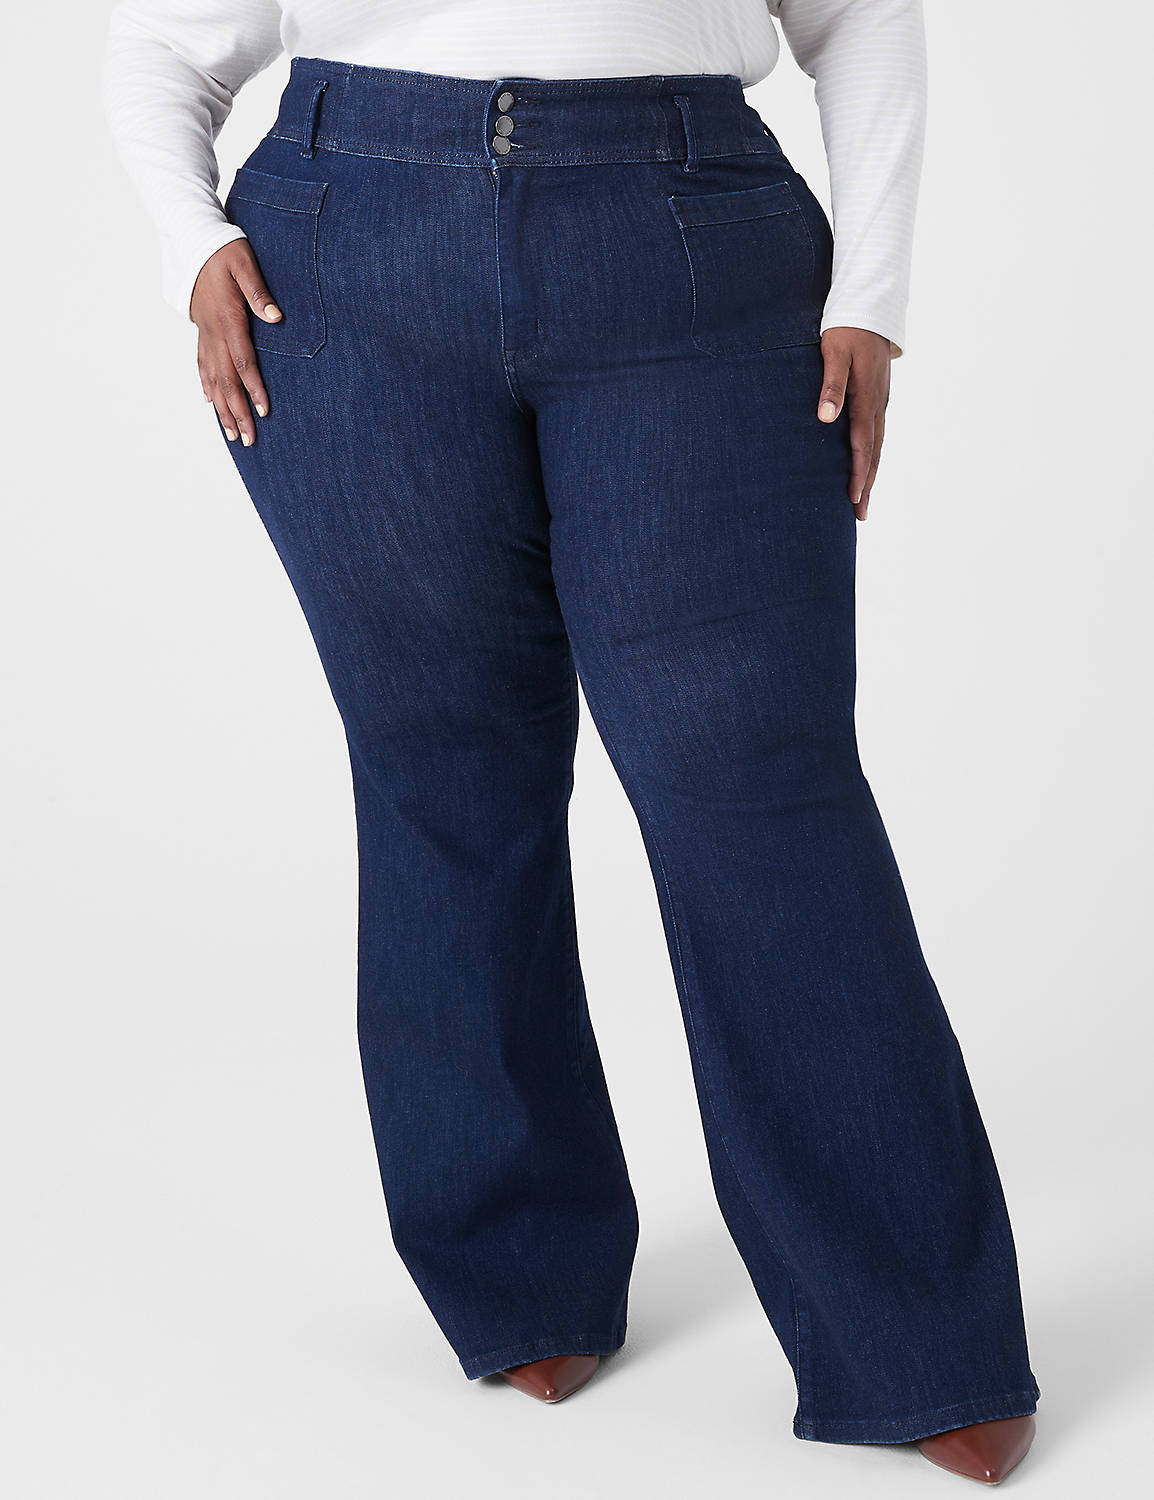 ULTRA HIGH RISE FLARE JEAN  -RINSE Product Image 1